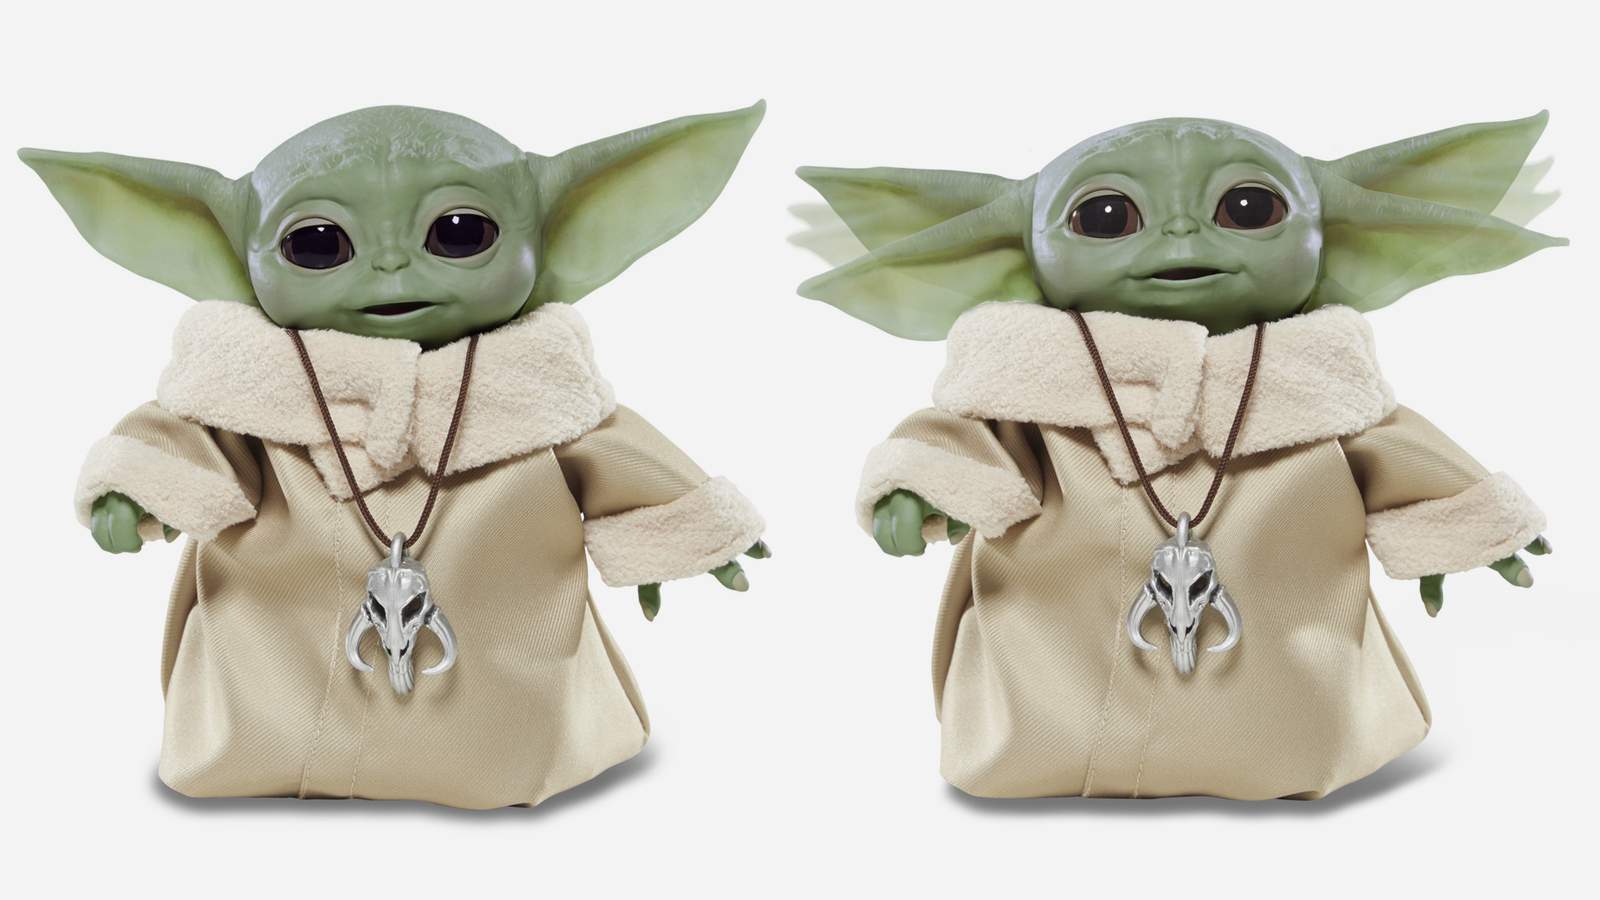 The Baby Yoda toys we've been waiting for are finally here.